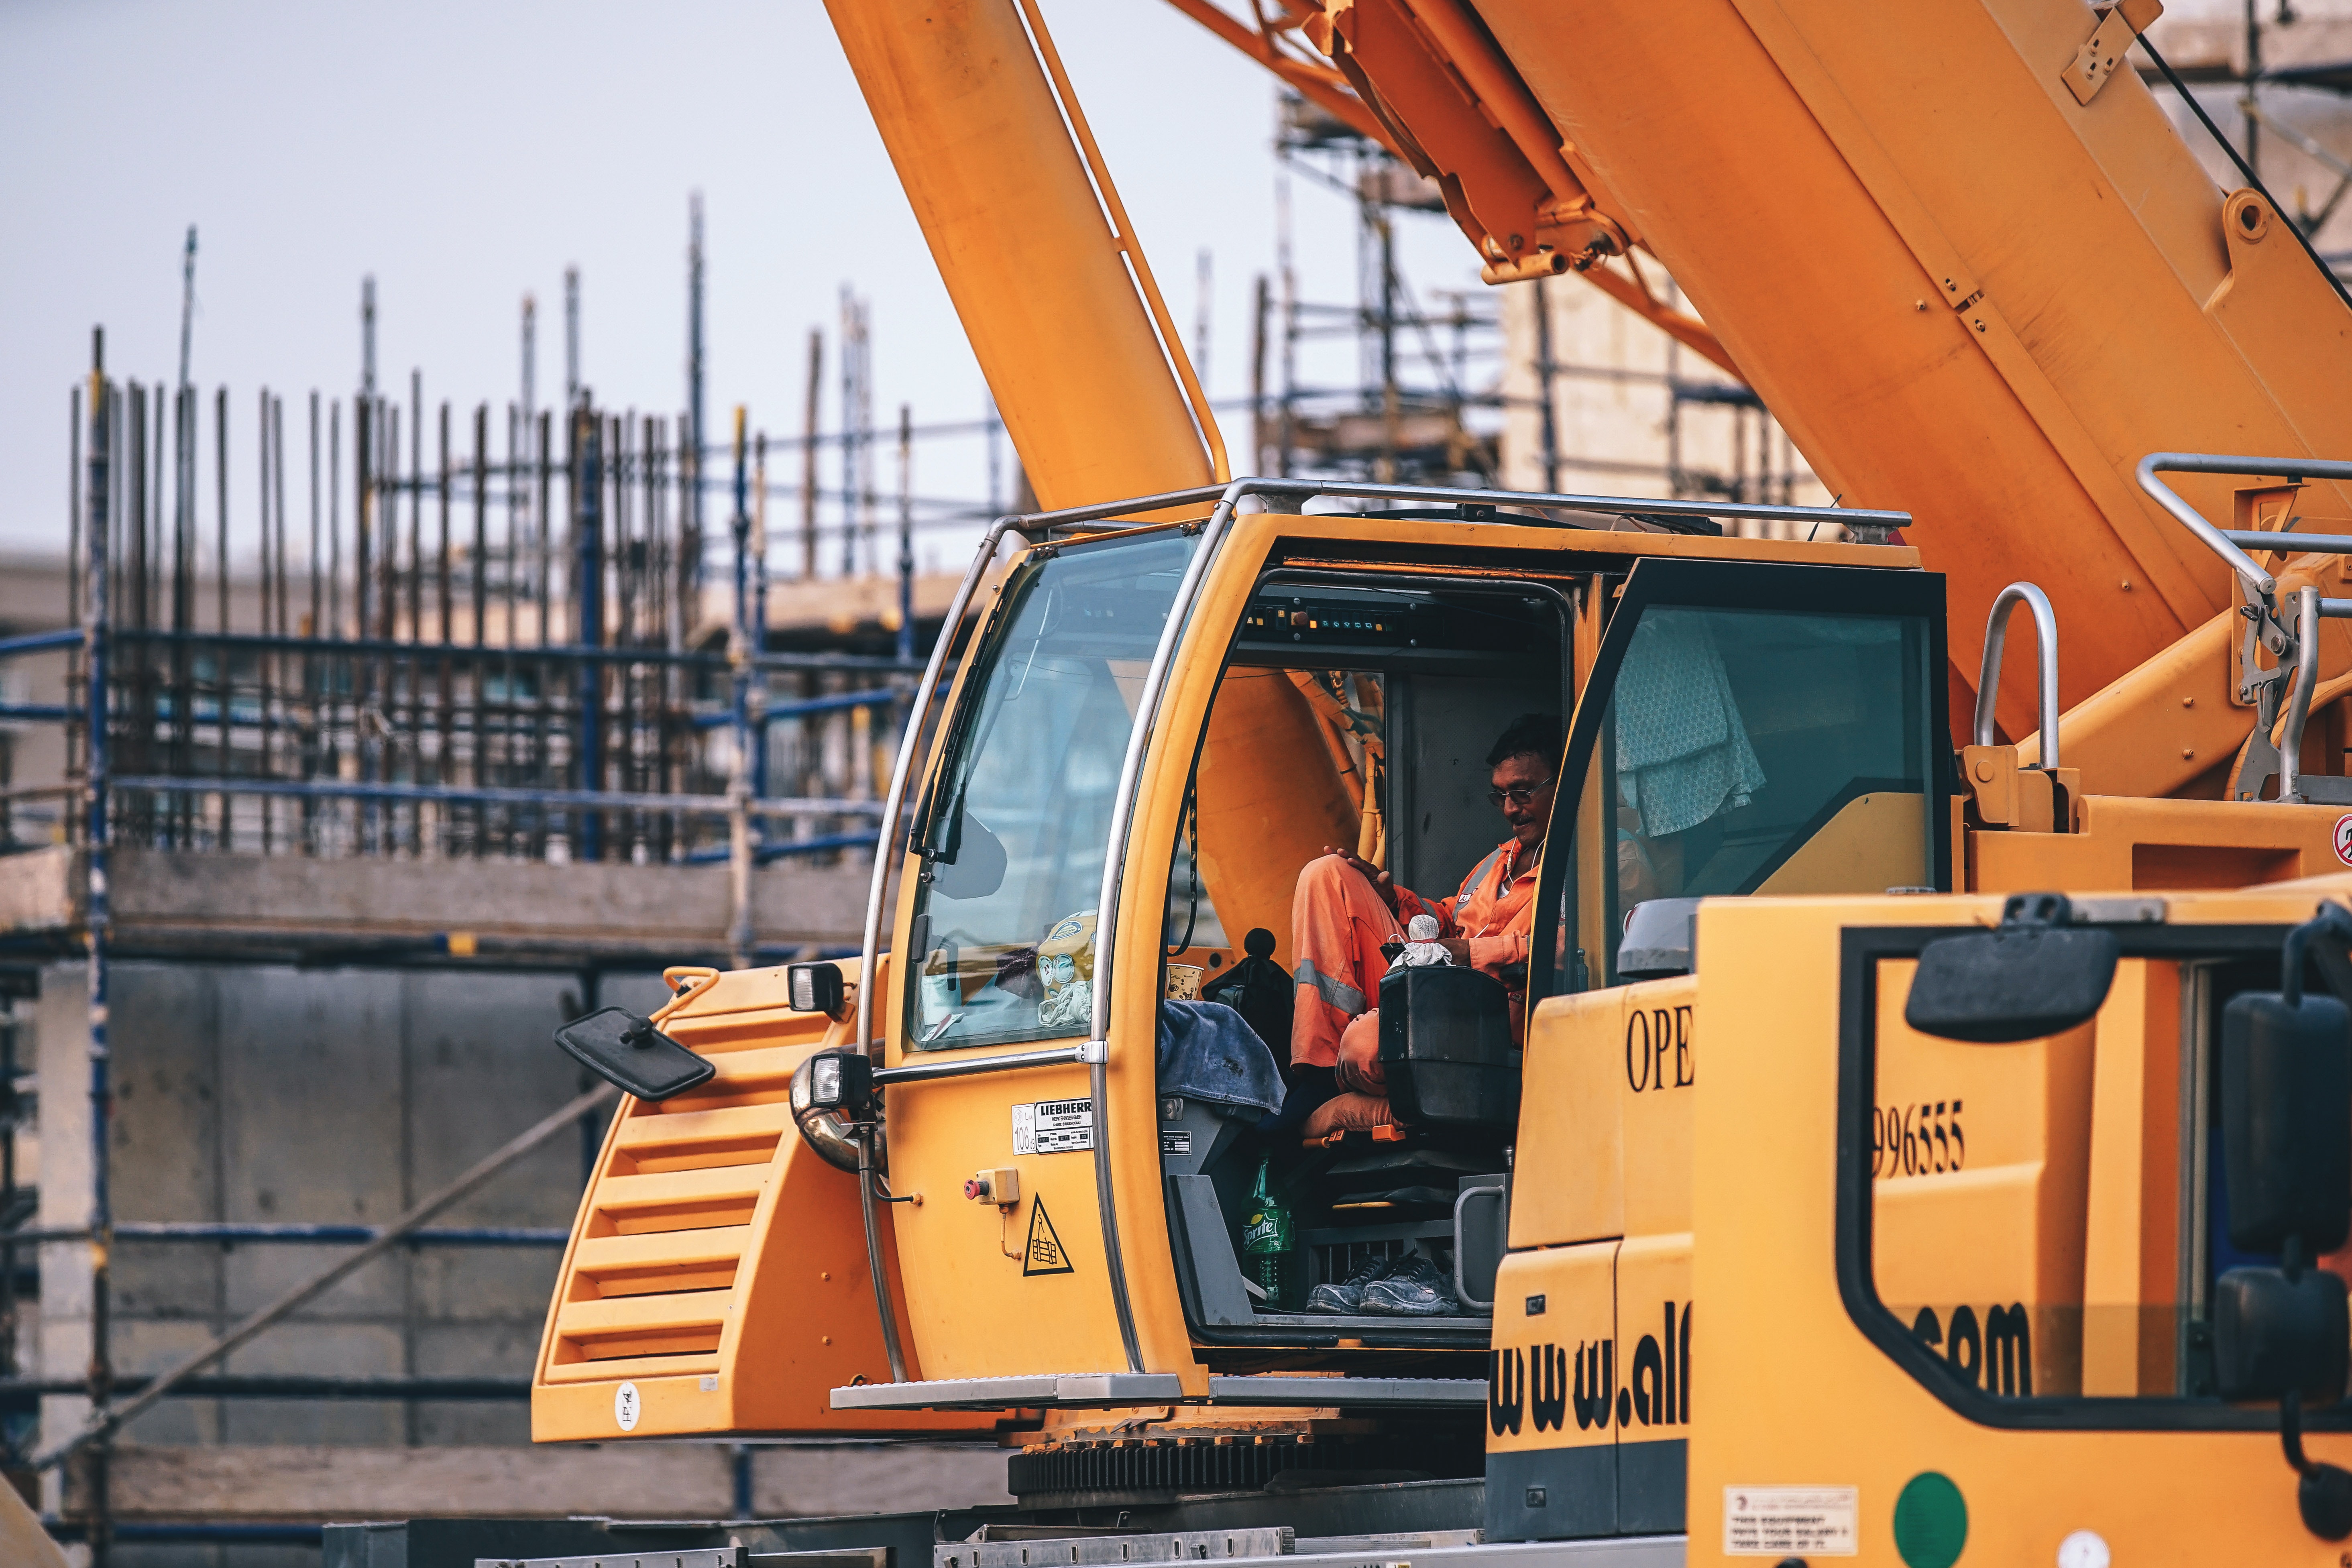 Construction Images · Pexels · Free Stock Photos